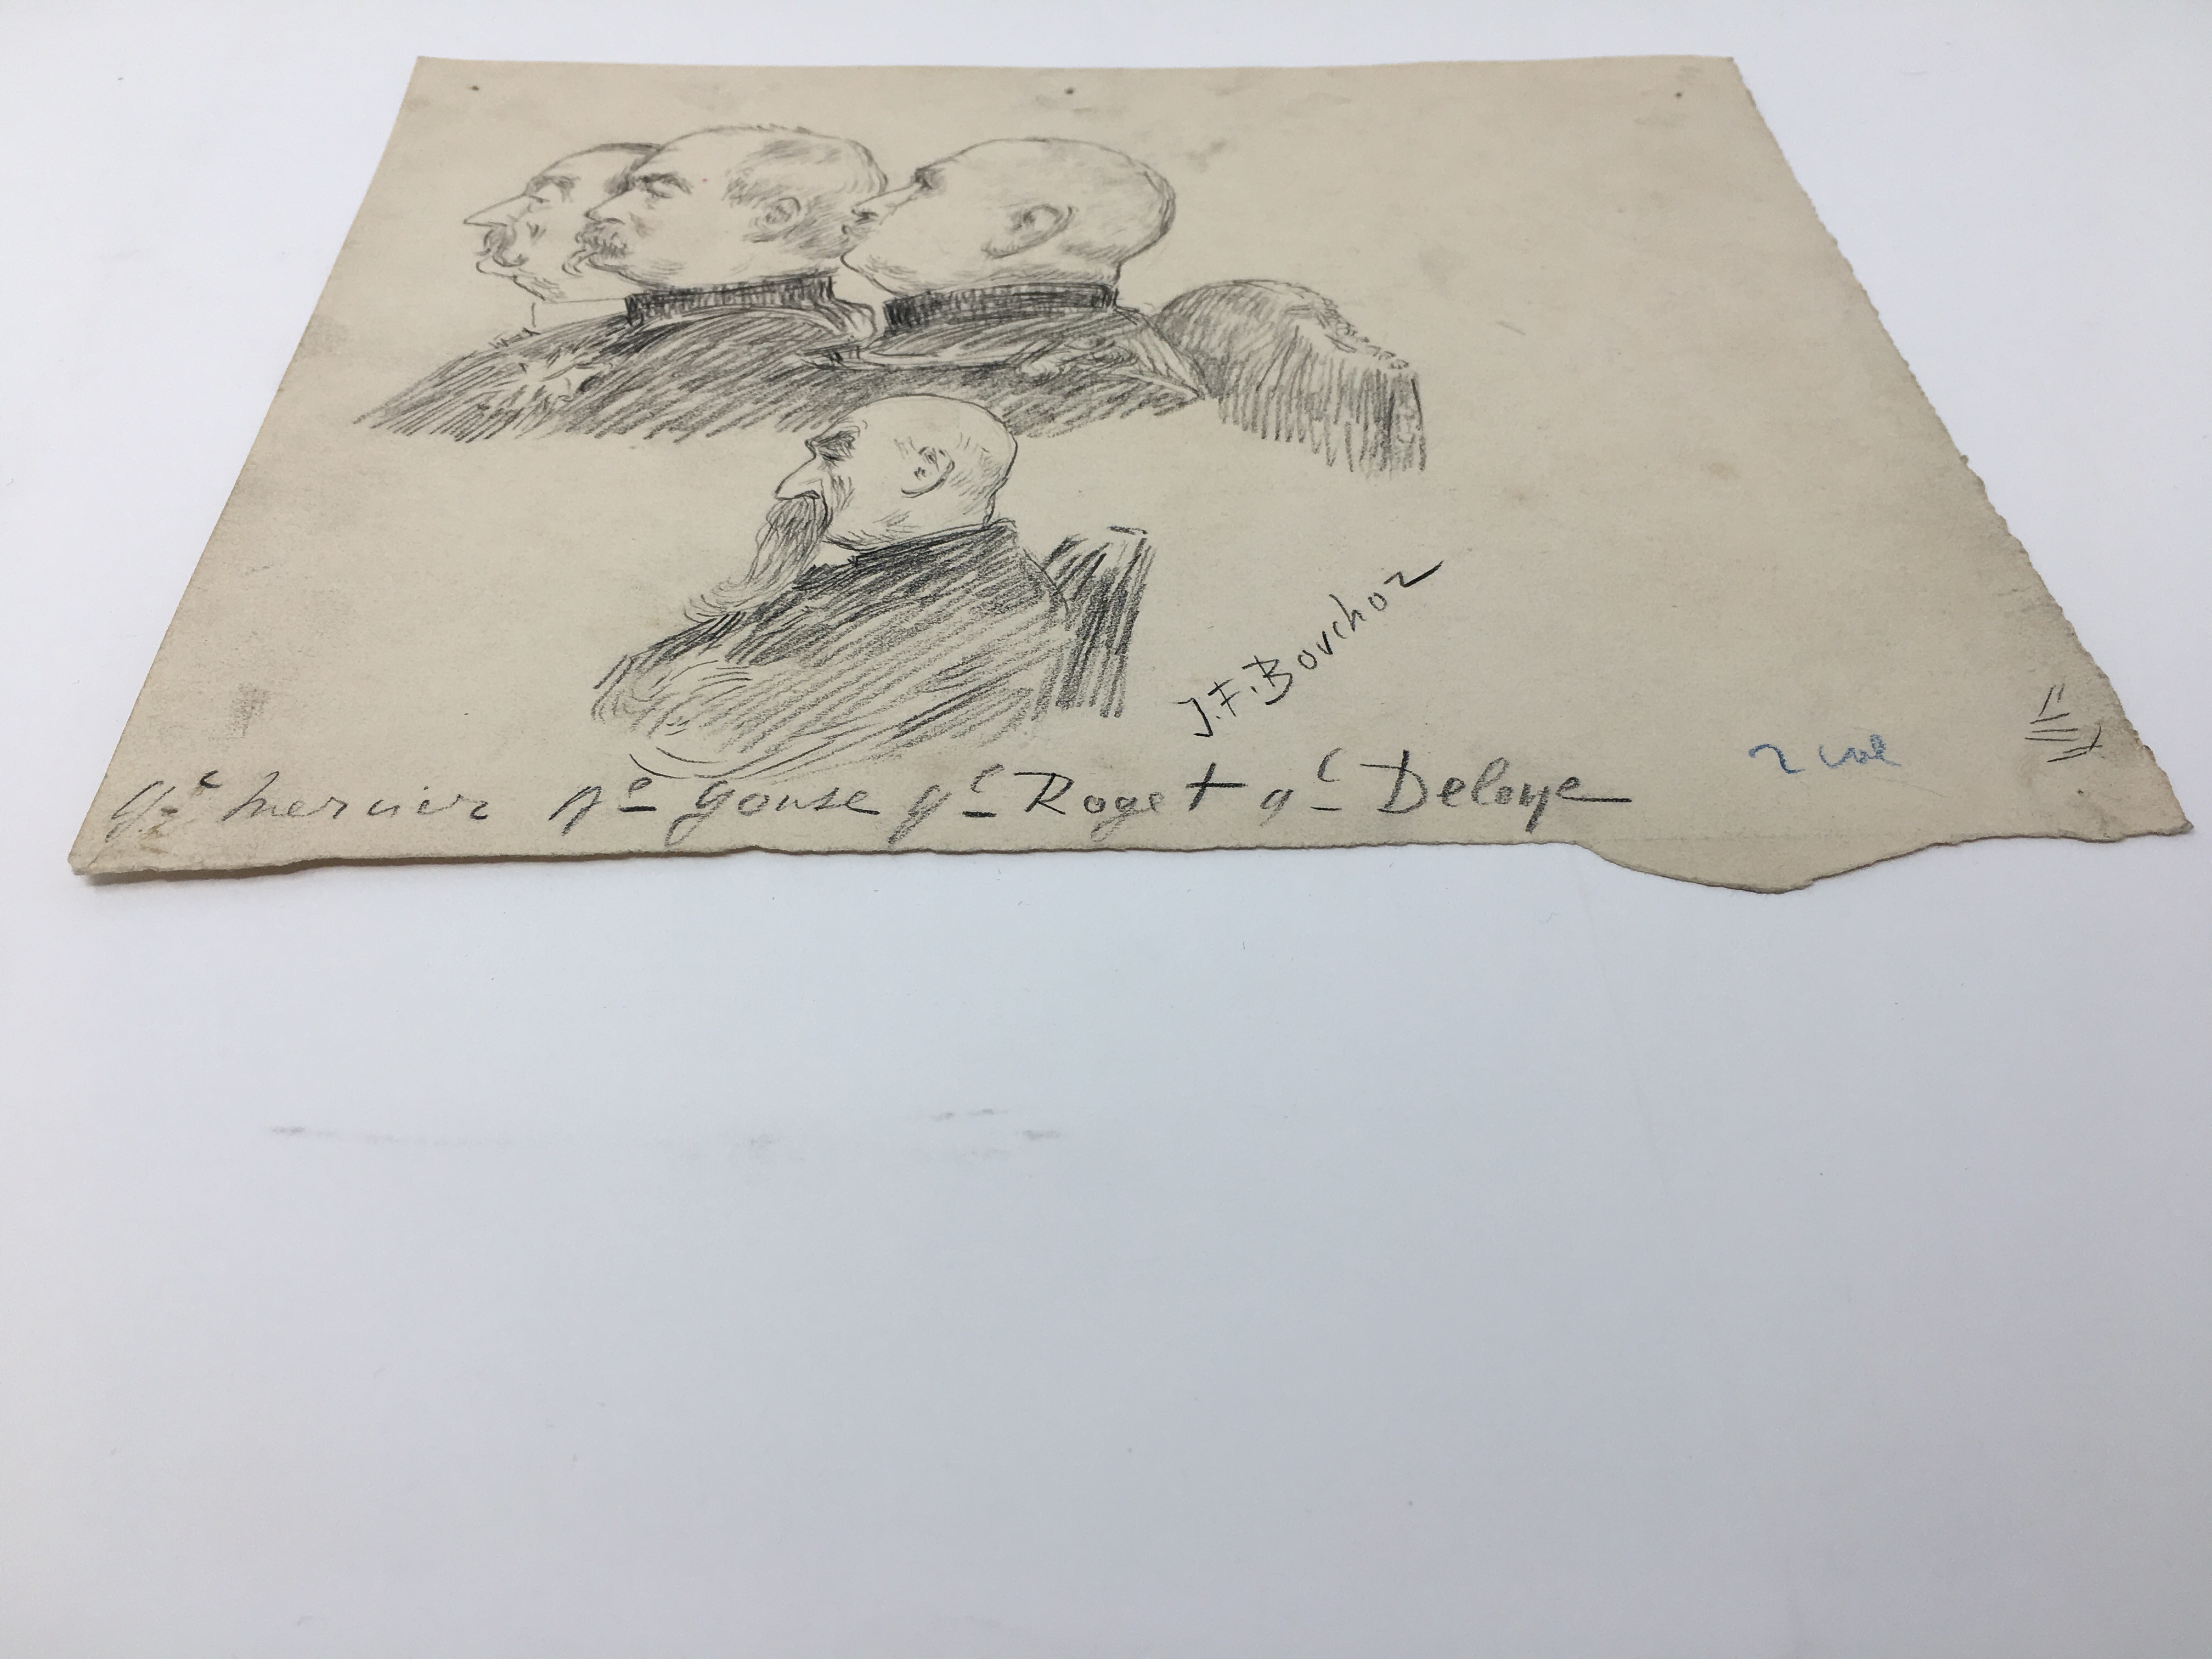 J'Accuse Newspaper, Emile Zola Quote, Signed Dreyfus Portrait, Rare Trial Drawings & Schwartzkoppen - Image 60 of 74